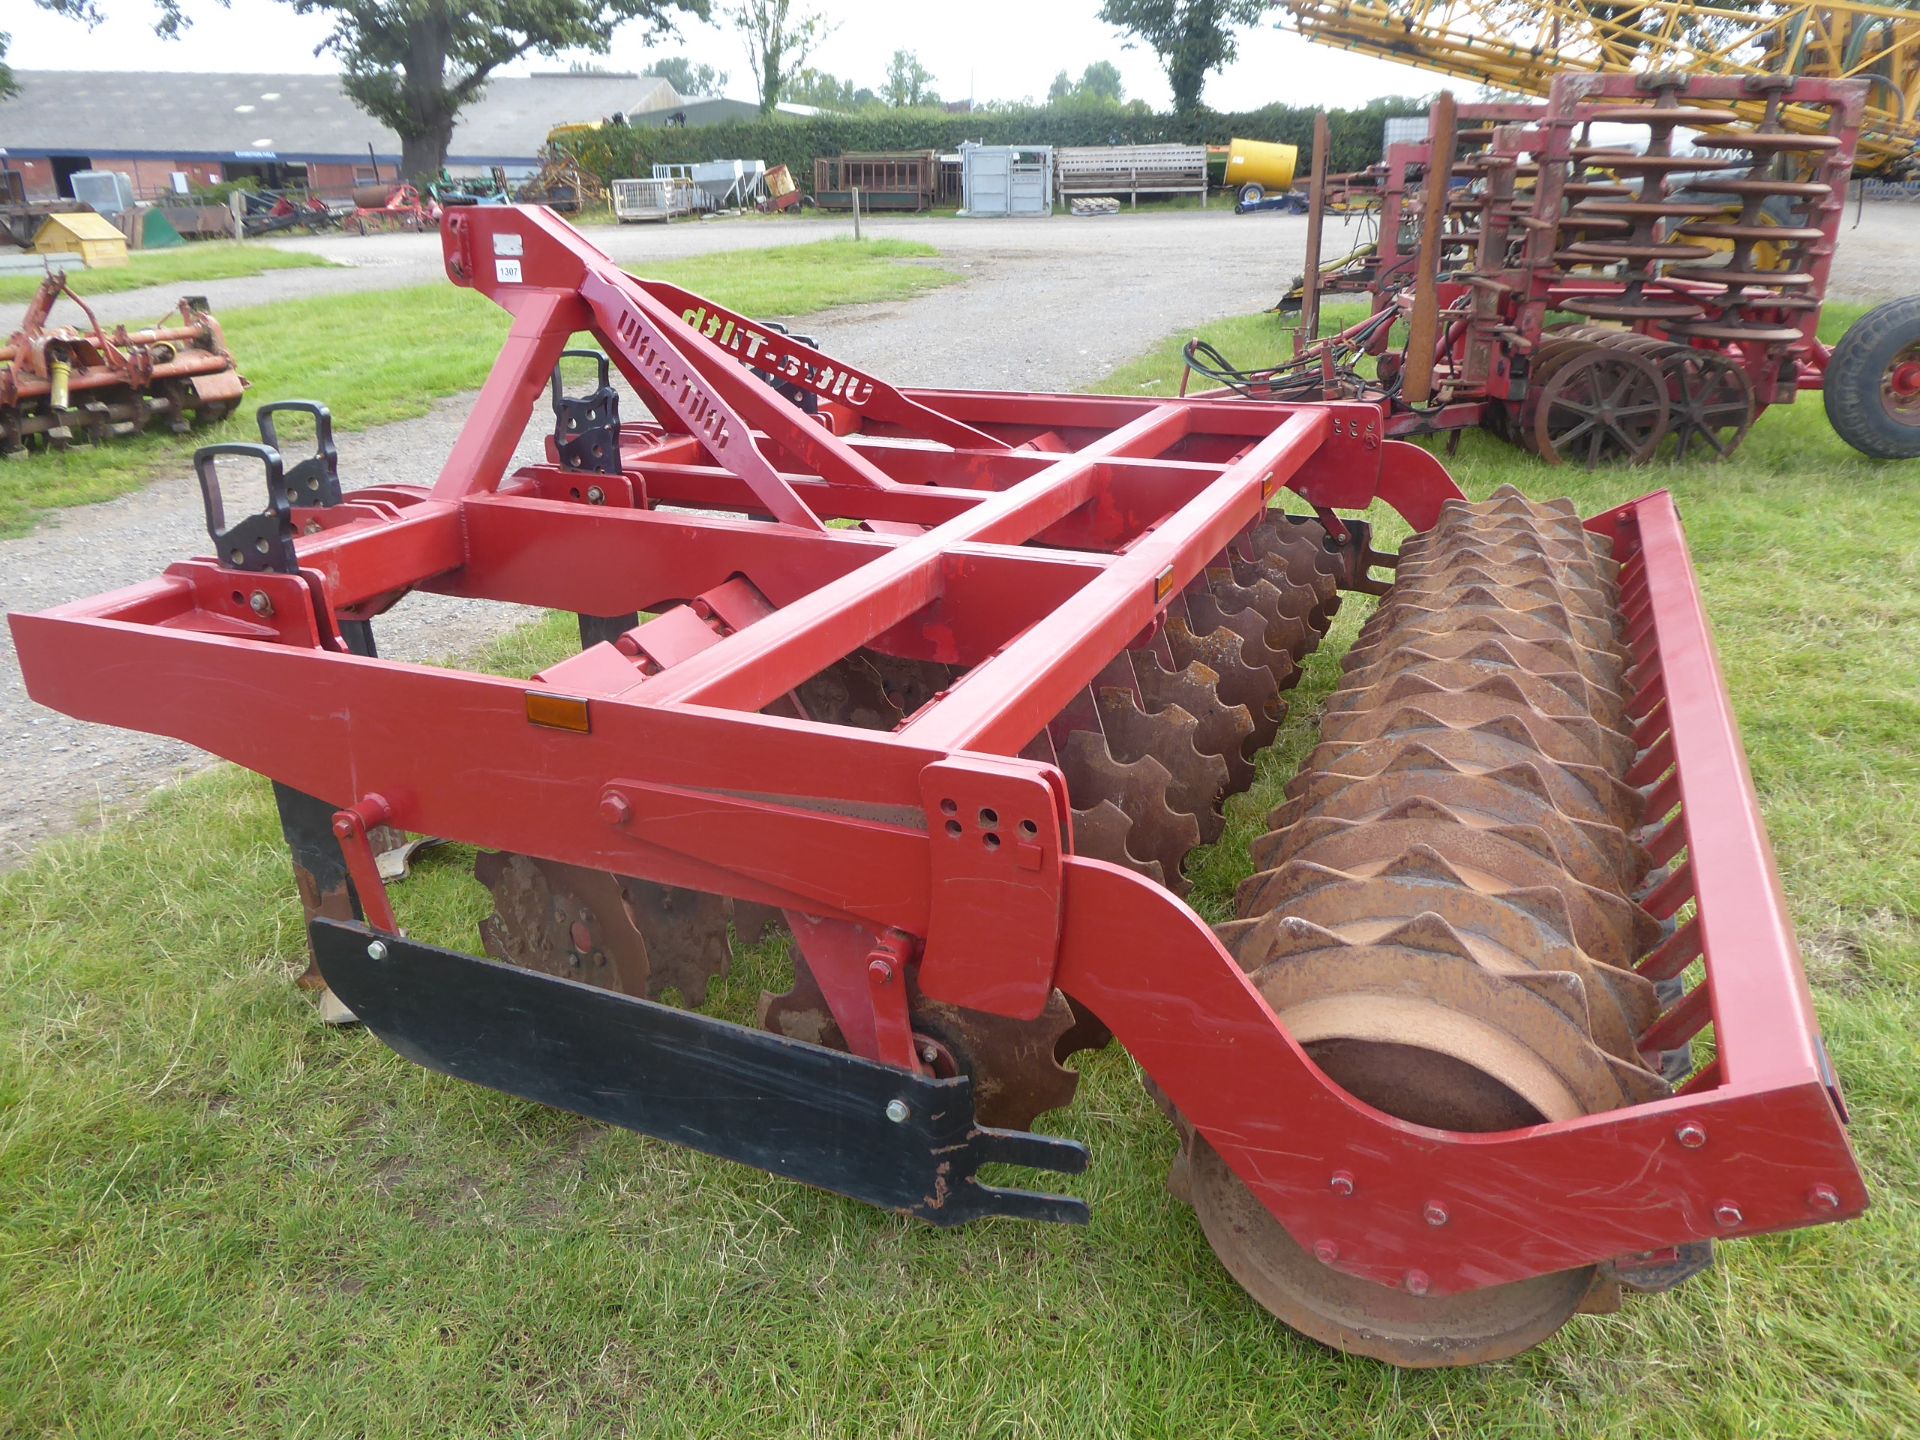 Farmforce Ultratilth 3m cultivator, c/w 6 Metcalfe legs, new discs and scrapers, very good - Image 3 of 3